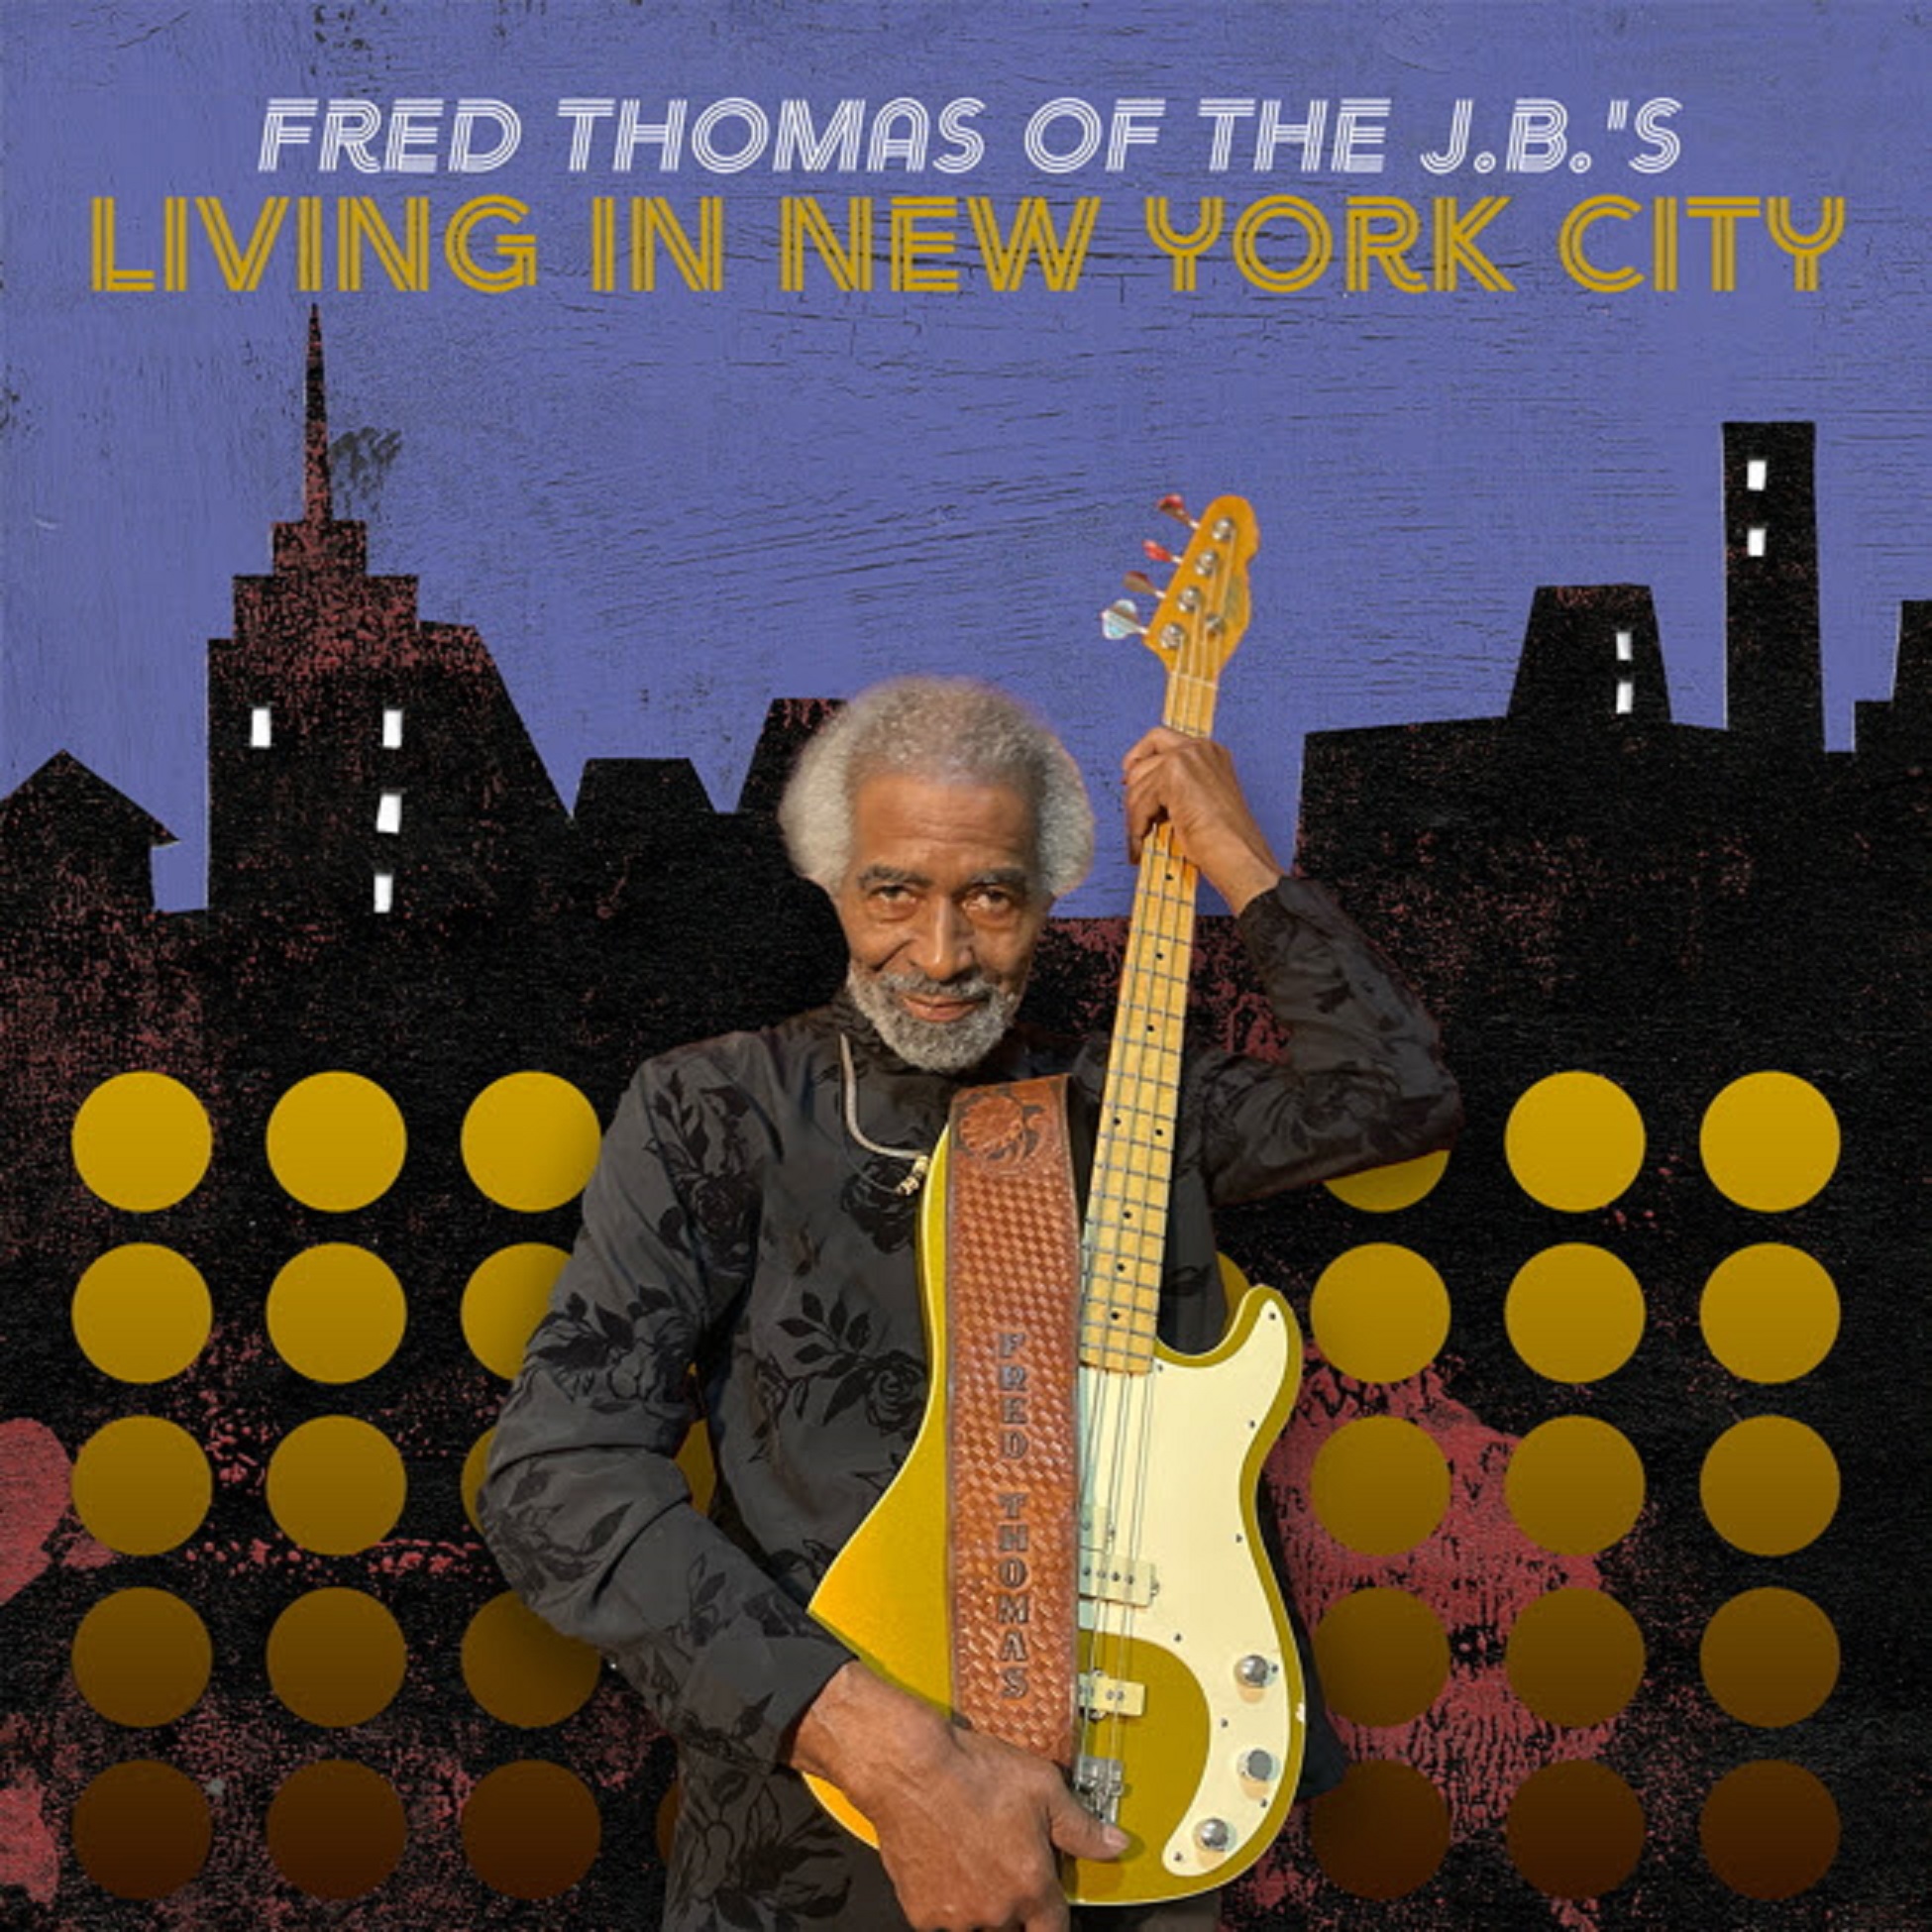 Funk Originator & 35-Year James Brown Bassist Fred Thomas Releases Solo Debut Single w/ Clyde Stubblefield on Drums